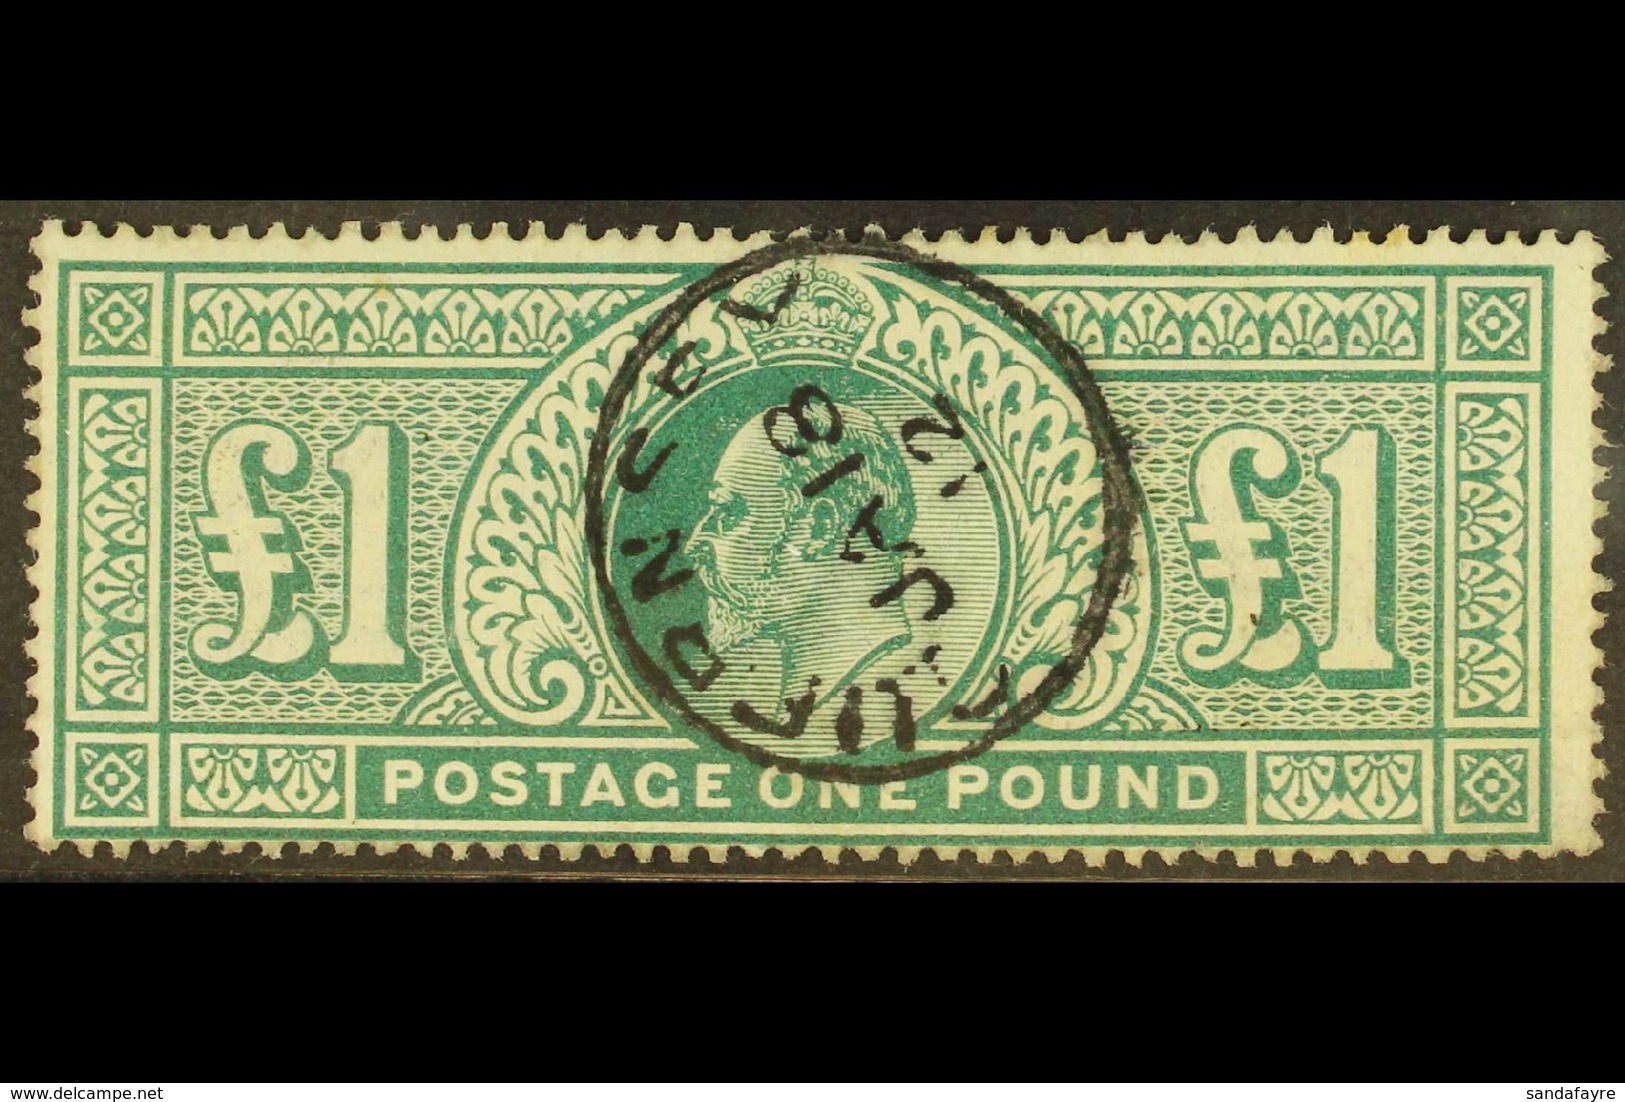 1902  £1 Dull Blue Green, SG 266, Cds Used (Guernsey Jan 18th 1912), Good Colour, Small Faults For More Images, Please V - Sin Clasificación